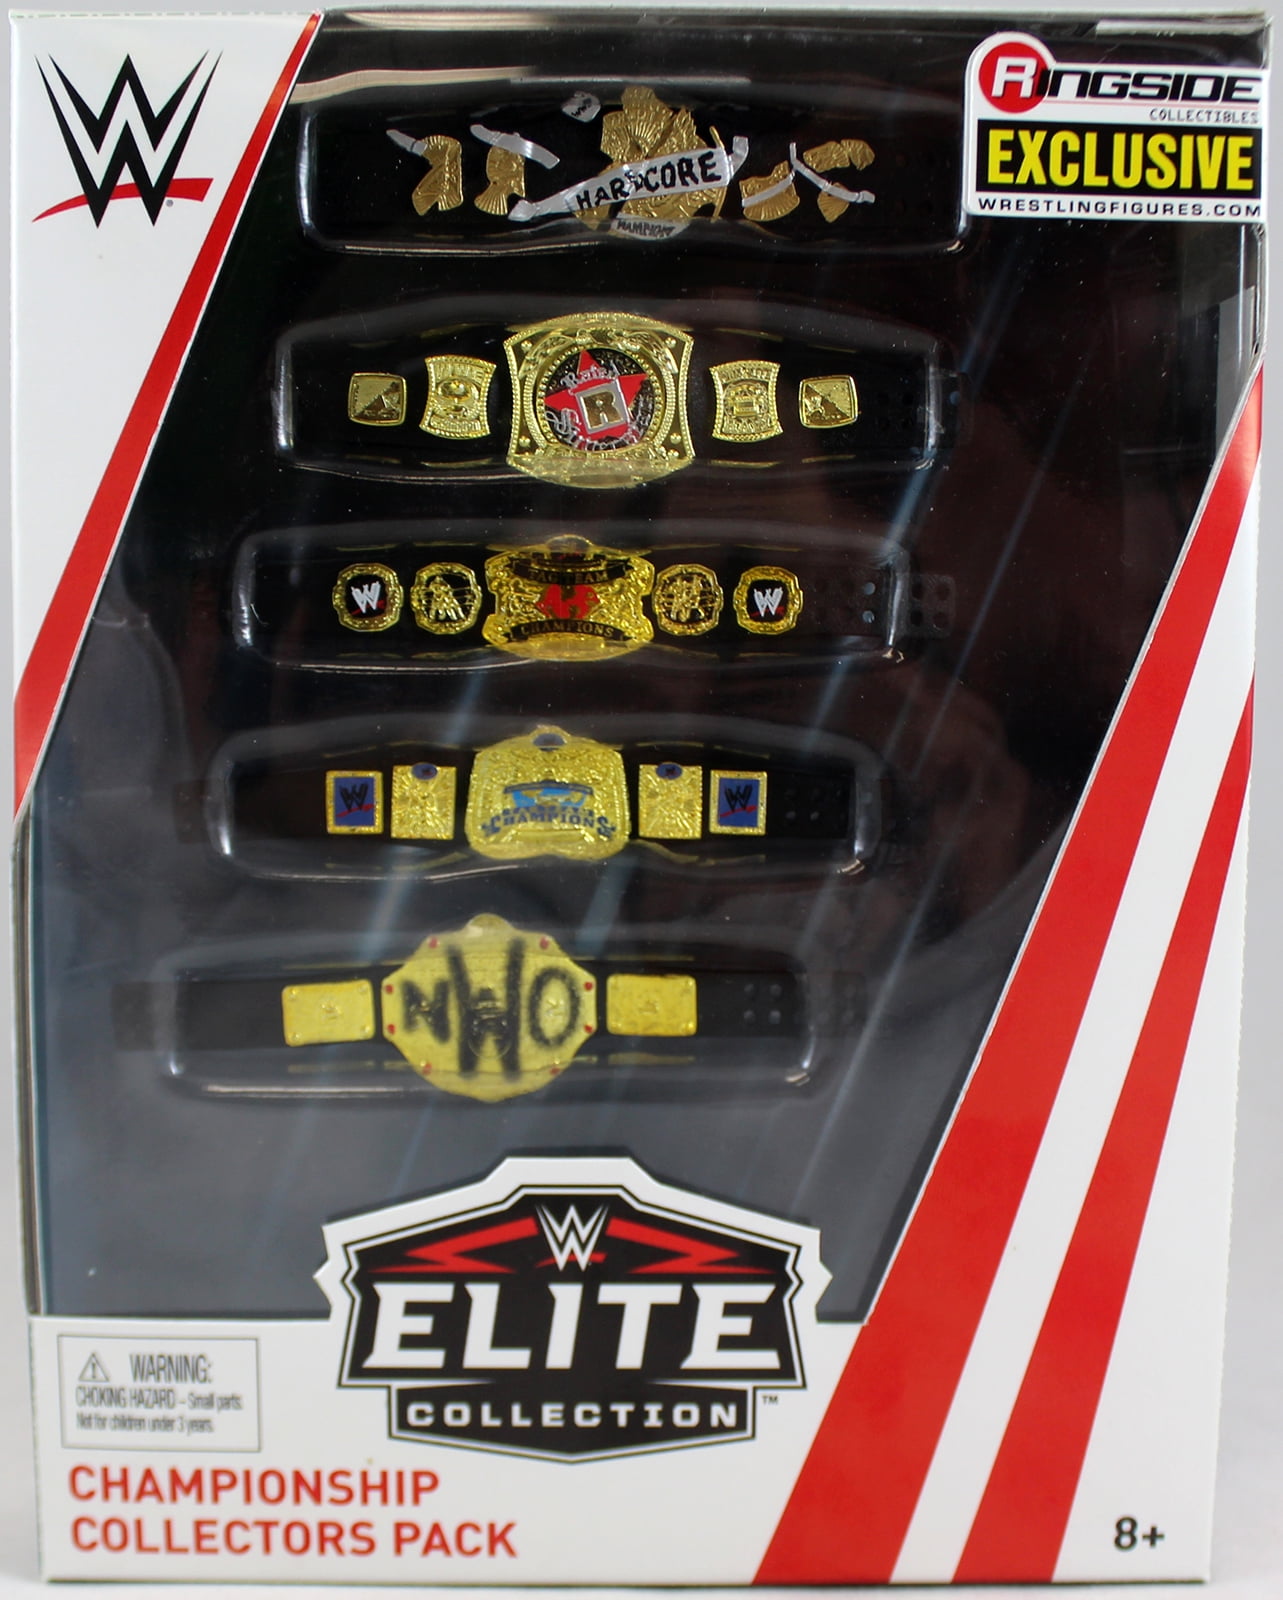 PWCrate Collectible 5 Pack (Fun Wrestling Items)